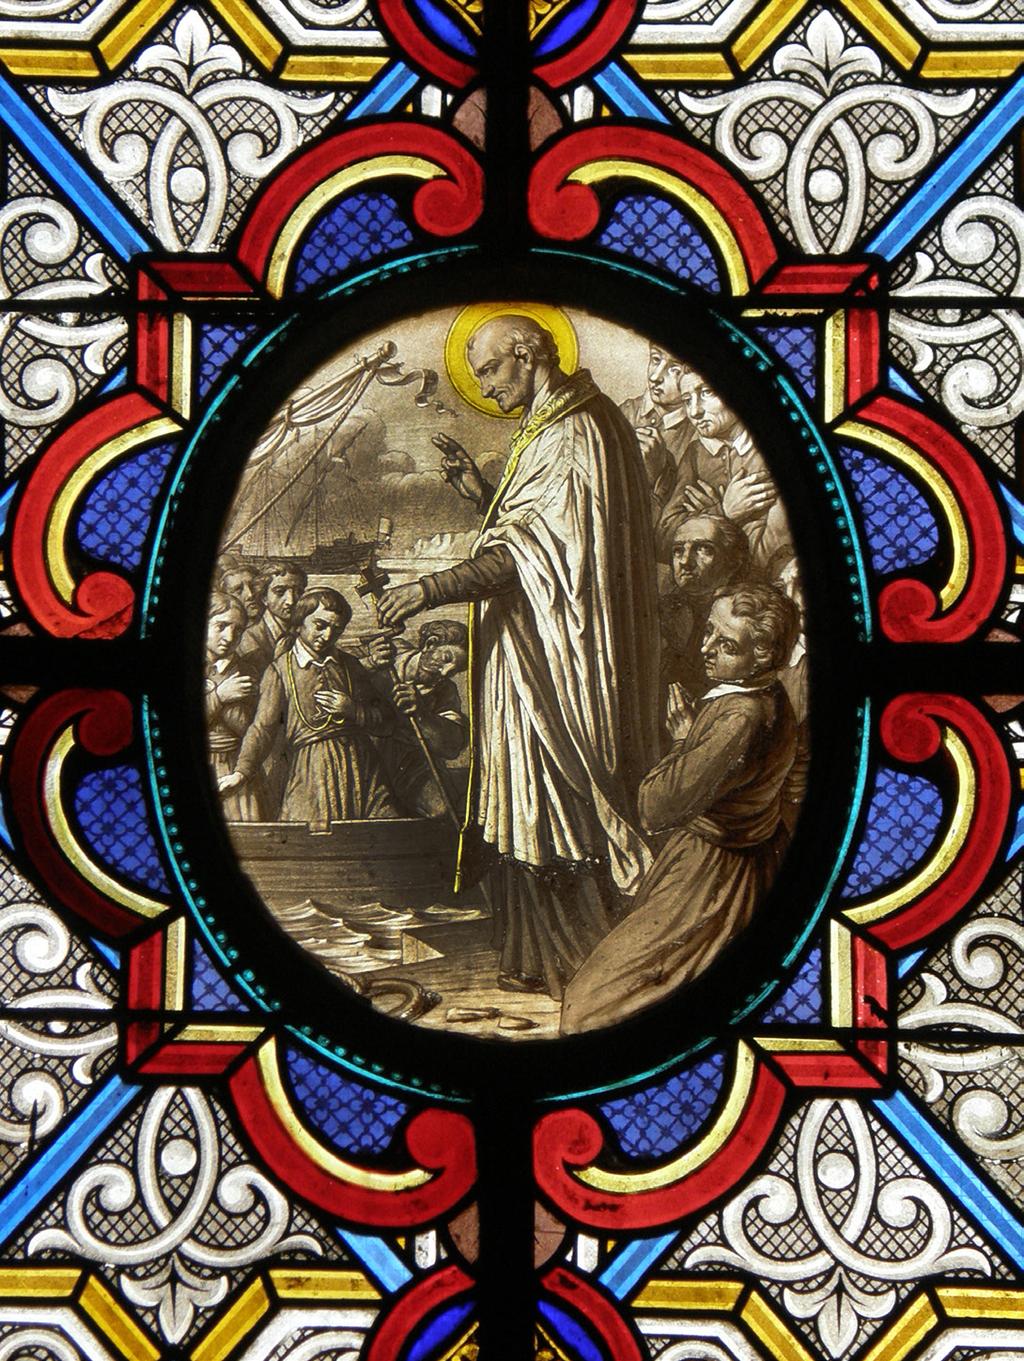 Vincent de Paul sending out missioners. Stained glass window by Laurent and Gsel, Paris. Courtesy St.